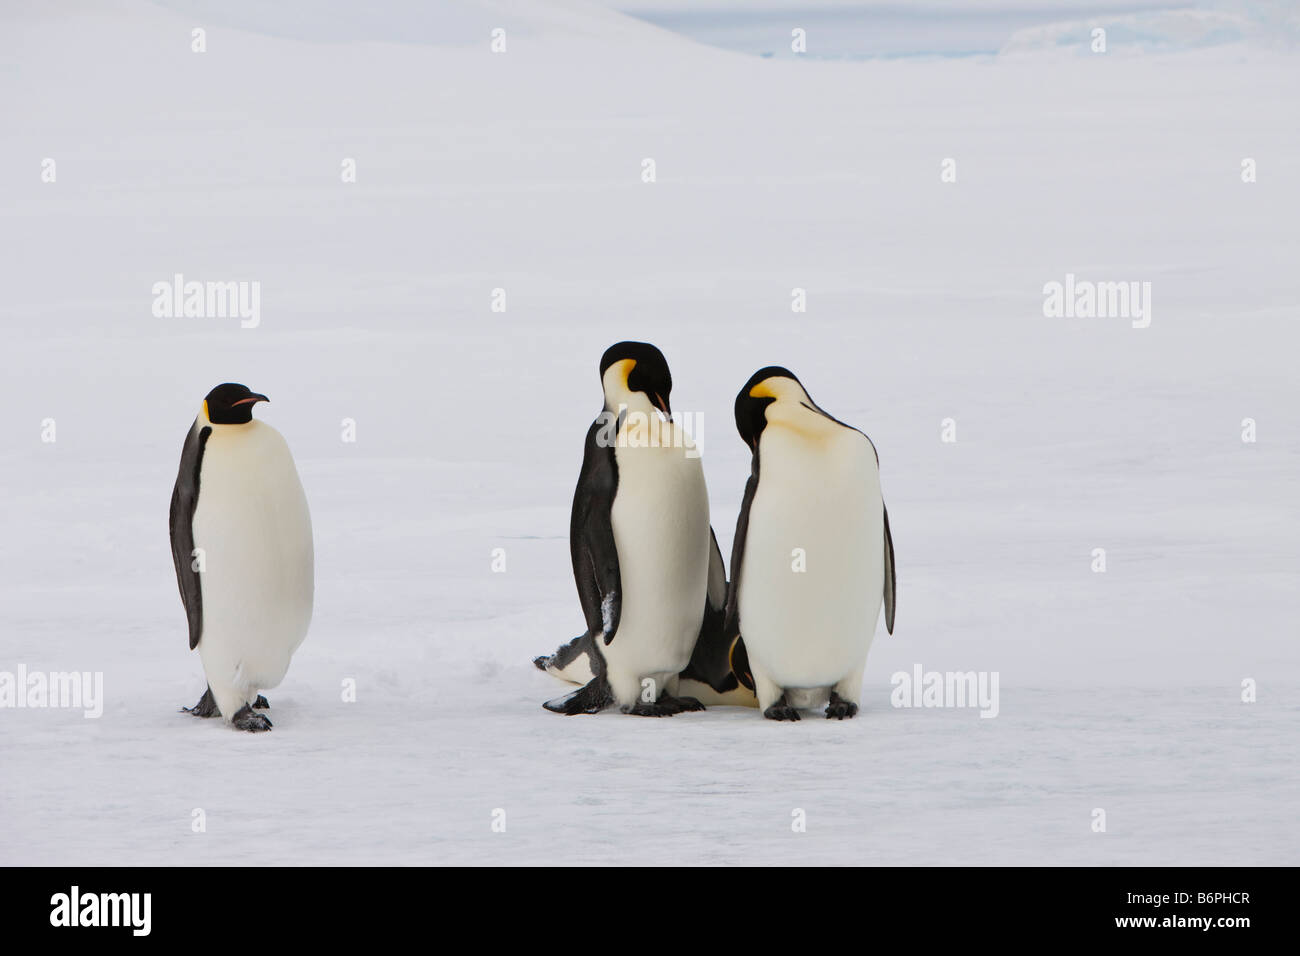 Cute emperor penguin walking toward 2 sleeping penguins on fast ice white snow background and foreground Weddell Sea Snow Hill Antarctica. Stock Photo